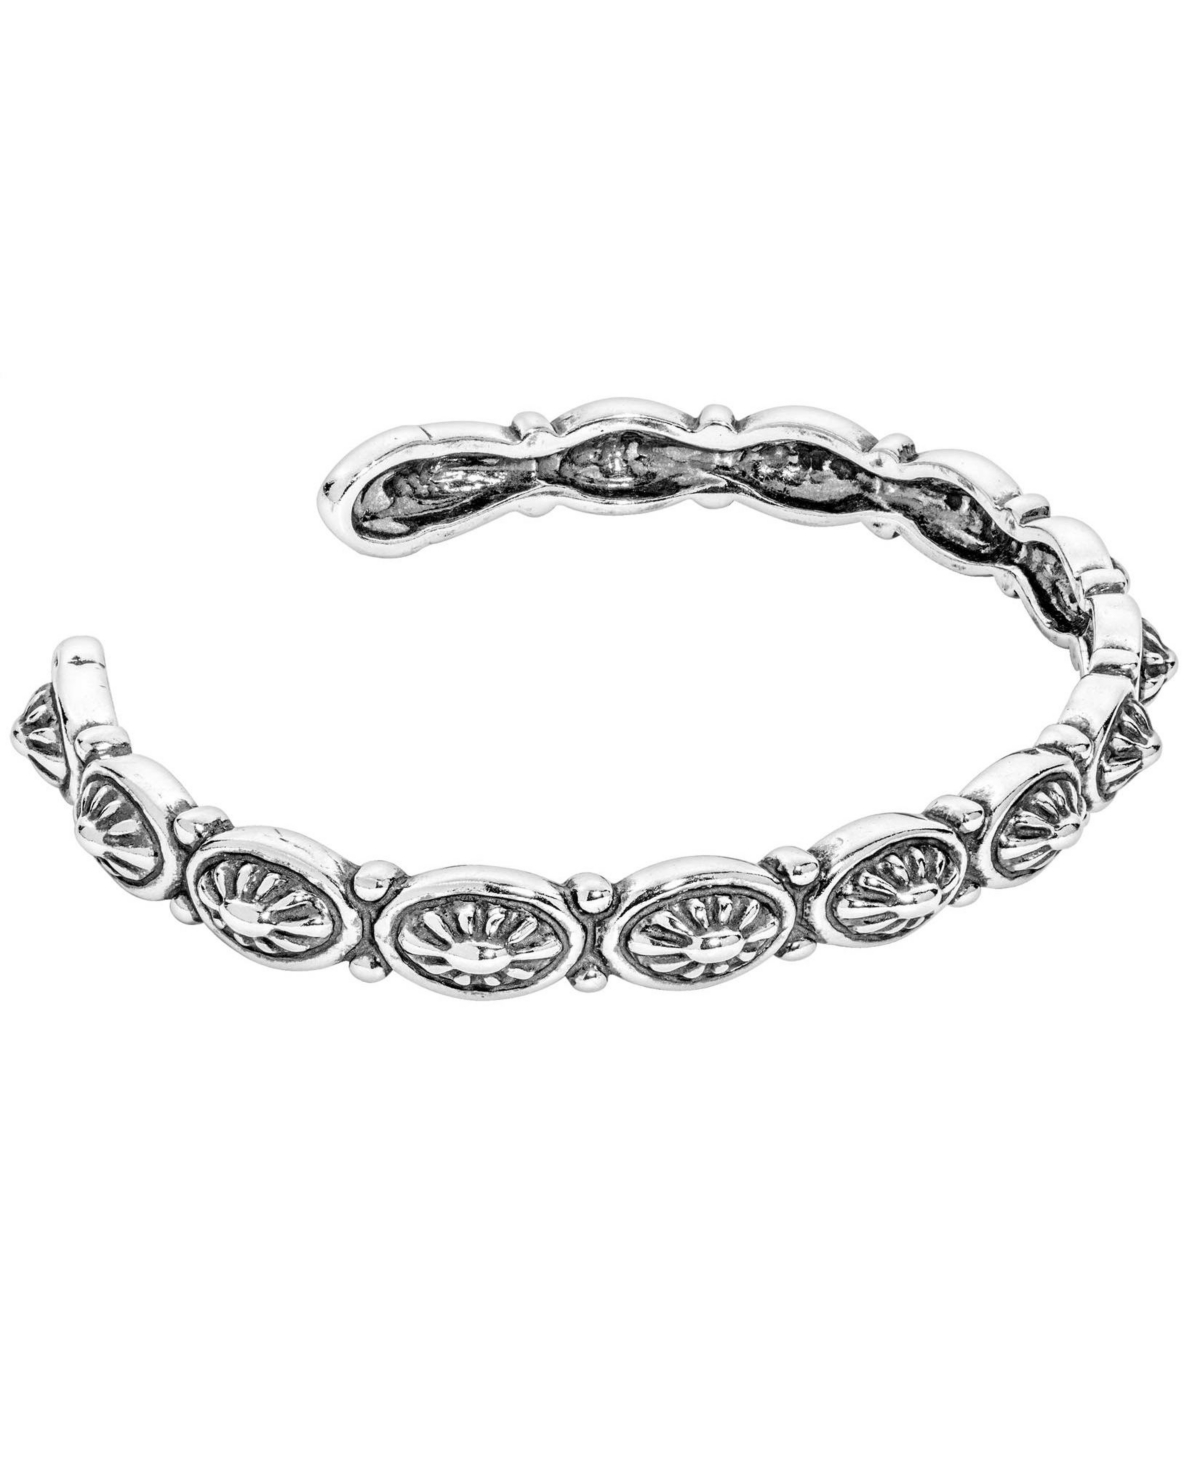 American West Sterling Silver Concha Slim Cuff Bracelet Size Small - Large - Sterling silver